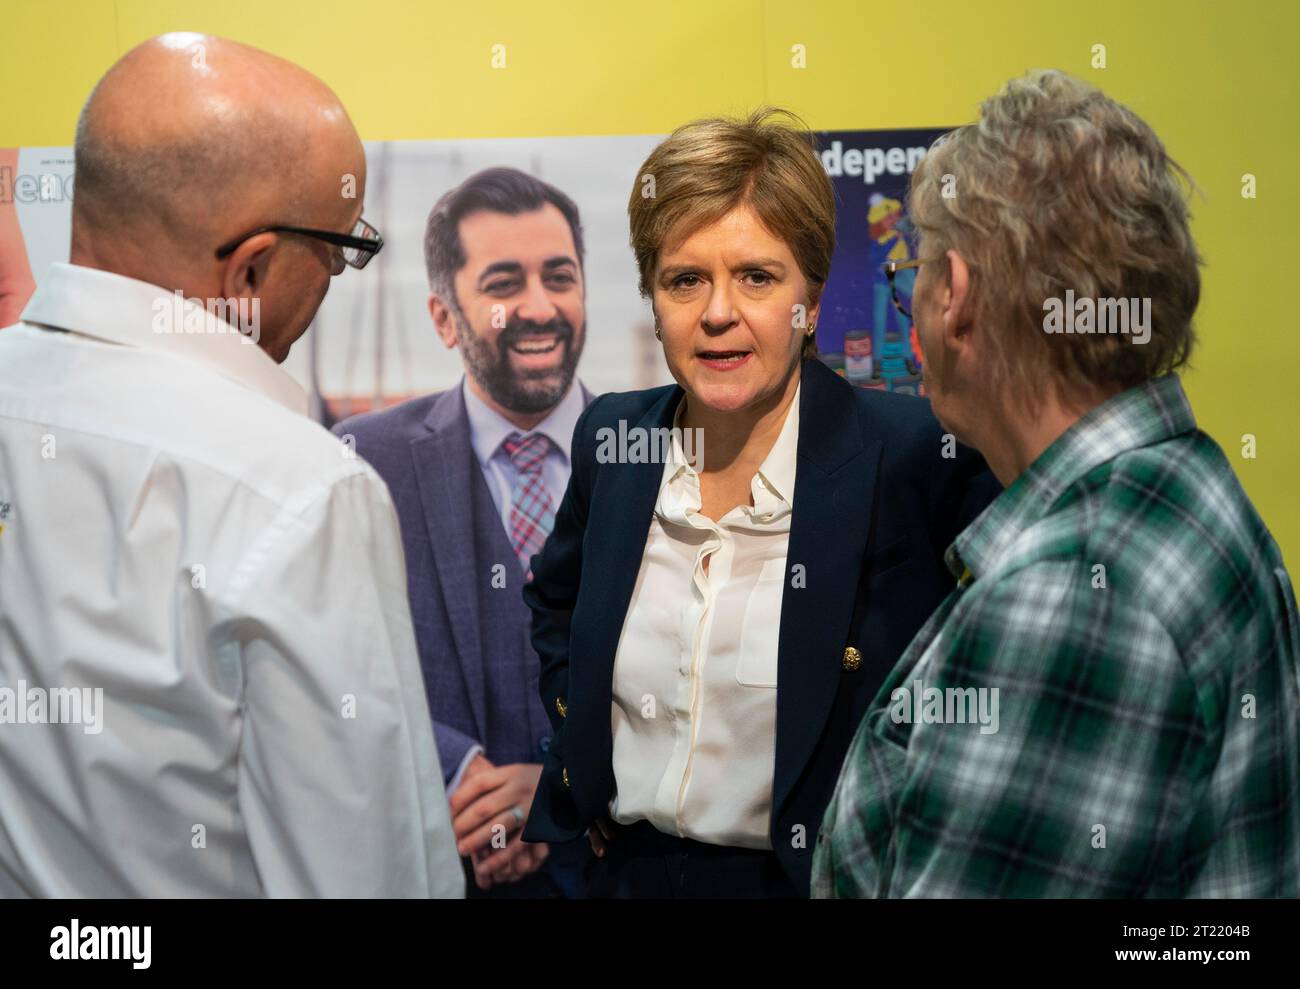 Aberdeen, Scotland, UK. 16th October 2023.  Day two of the SNP annual conference and former First Minister Nicola Sturgeon makes an appearance. A media frenzy followed before she made her way into the conference venue to listen to the afternoon’s proceedings. Nicola Sturgeon at the independence stall overlooked by a poster of First Minister Humza Yousaf.  Iain Masterton/Alamy Live News Stock Photo